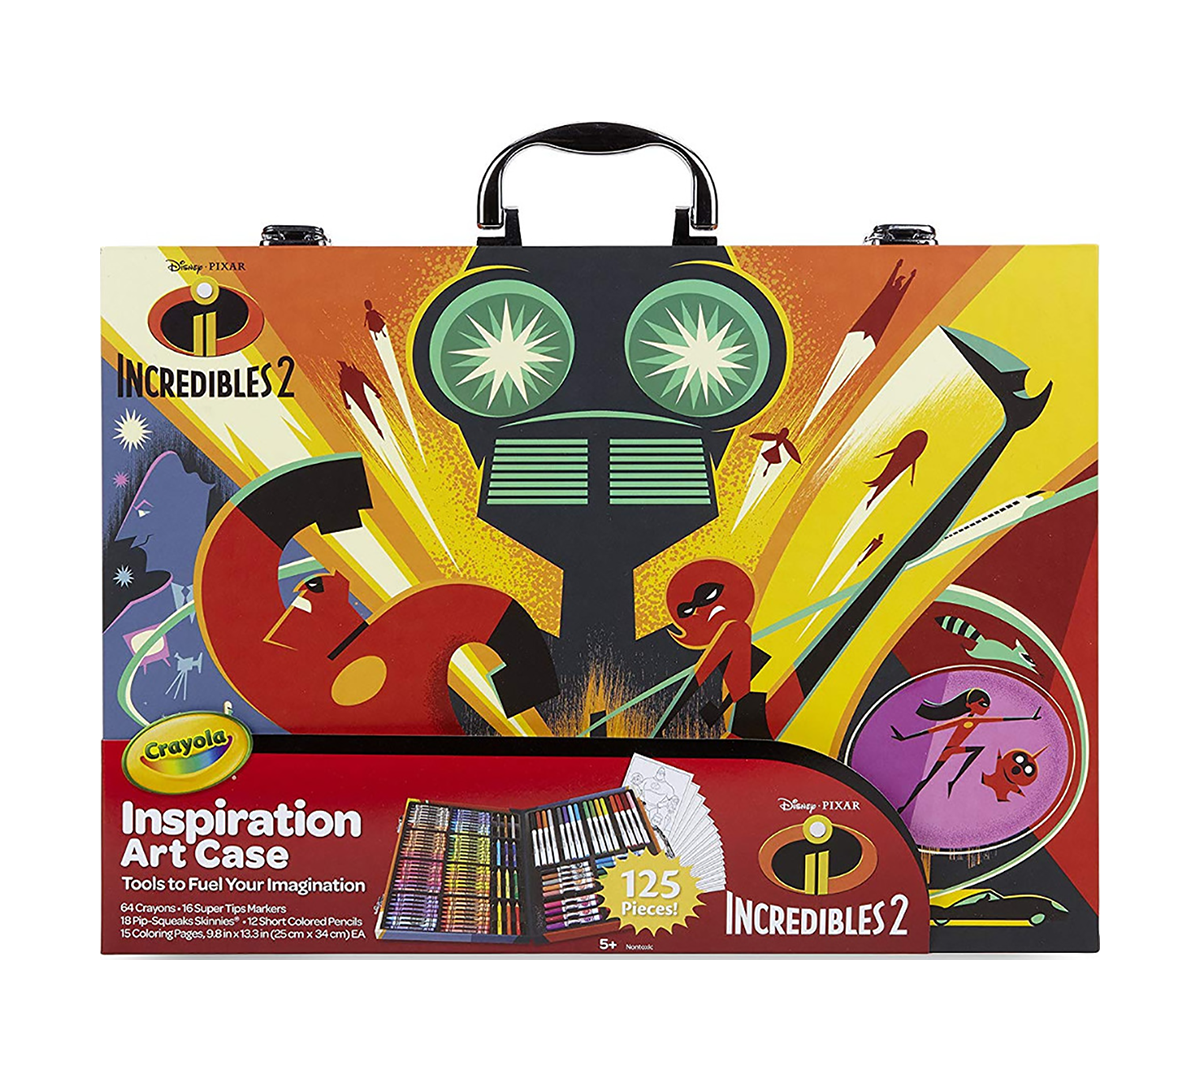 Download Crayola, Incredibles 2, Inspiration Art Case, Over 90 Pieces: 34 Washable Markers, 64 Crayons ...